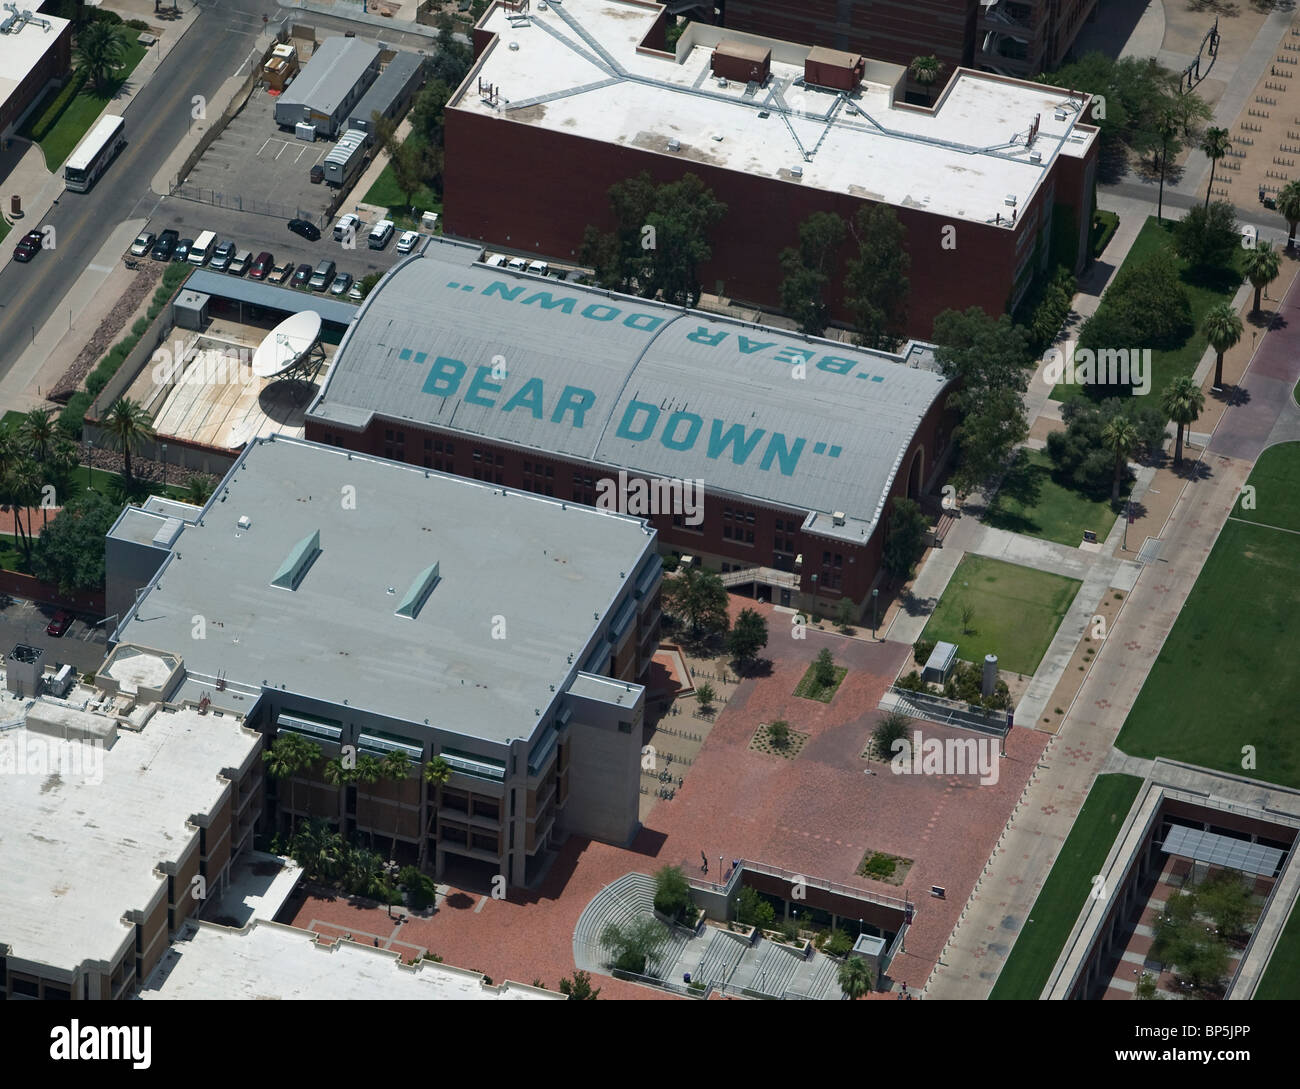 aerial view above campus buildings Bear Down rooftop sign University of Arizona Tucson Stock Photo